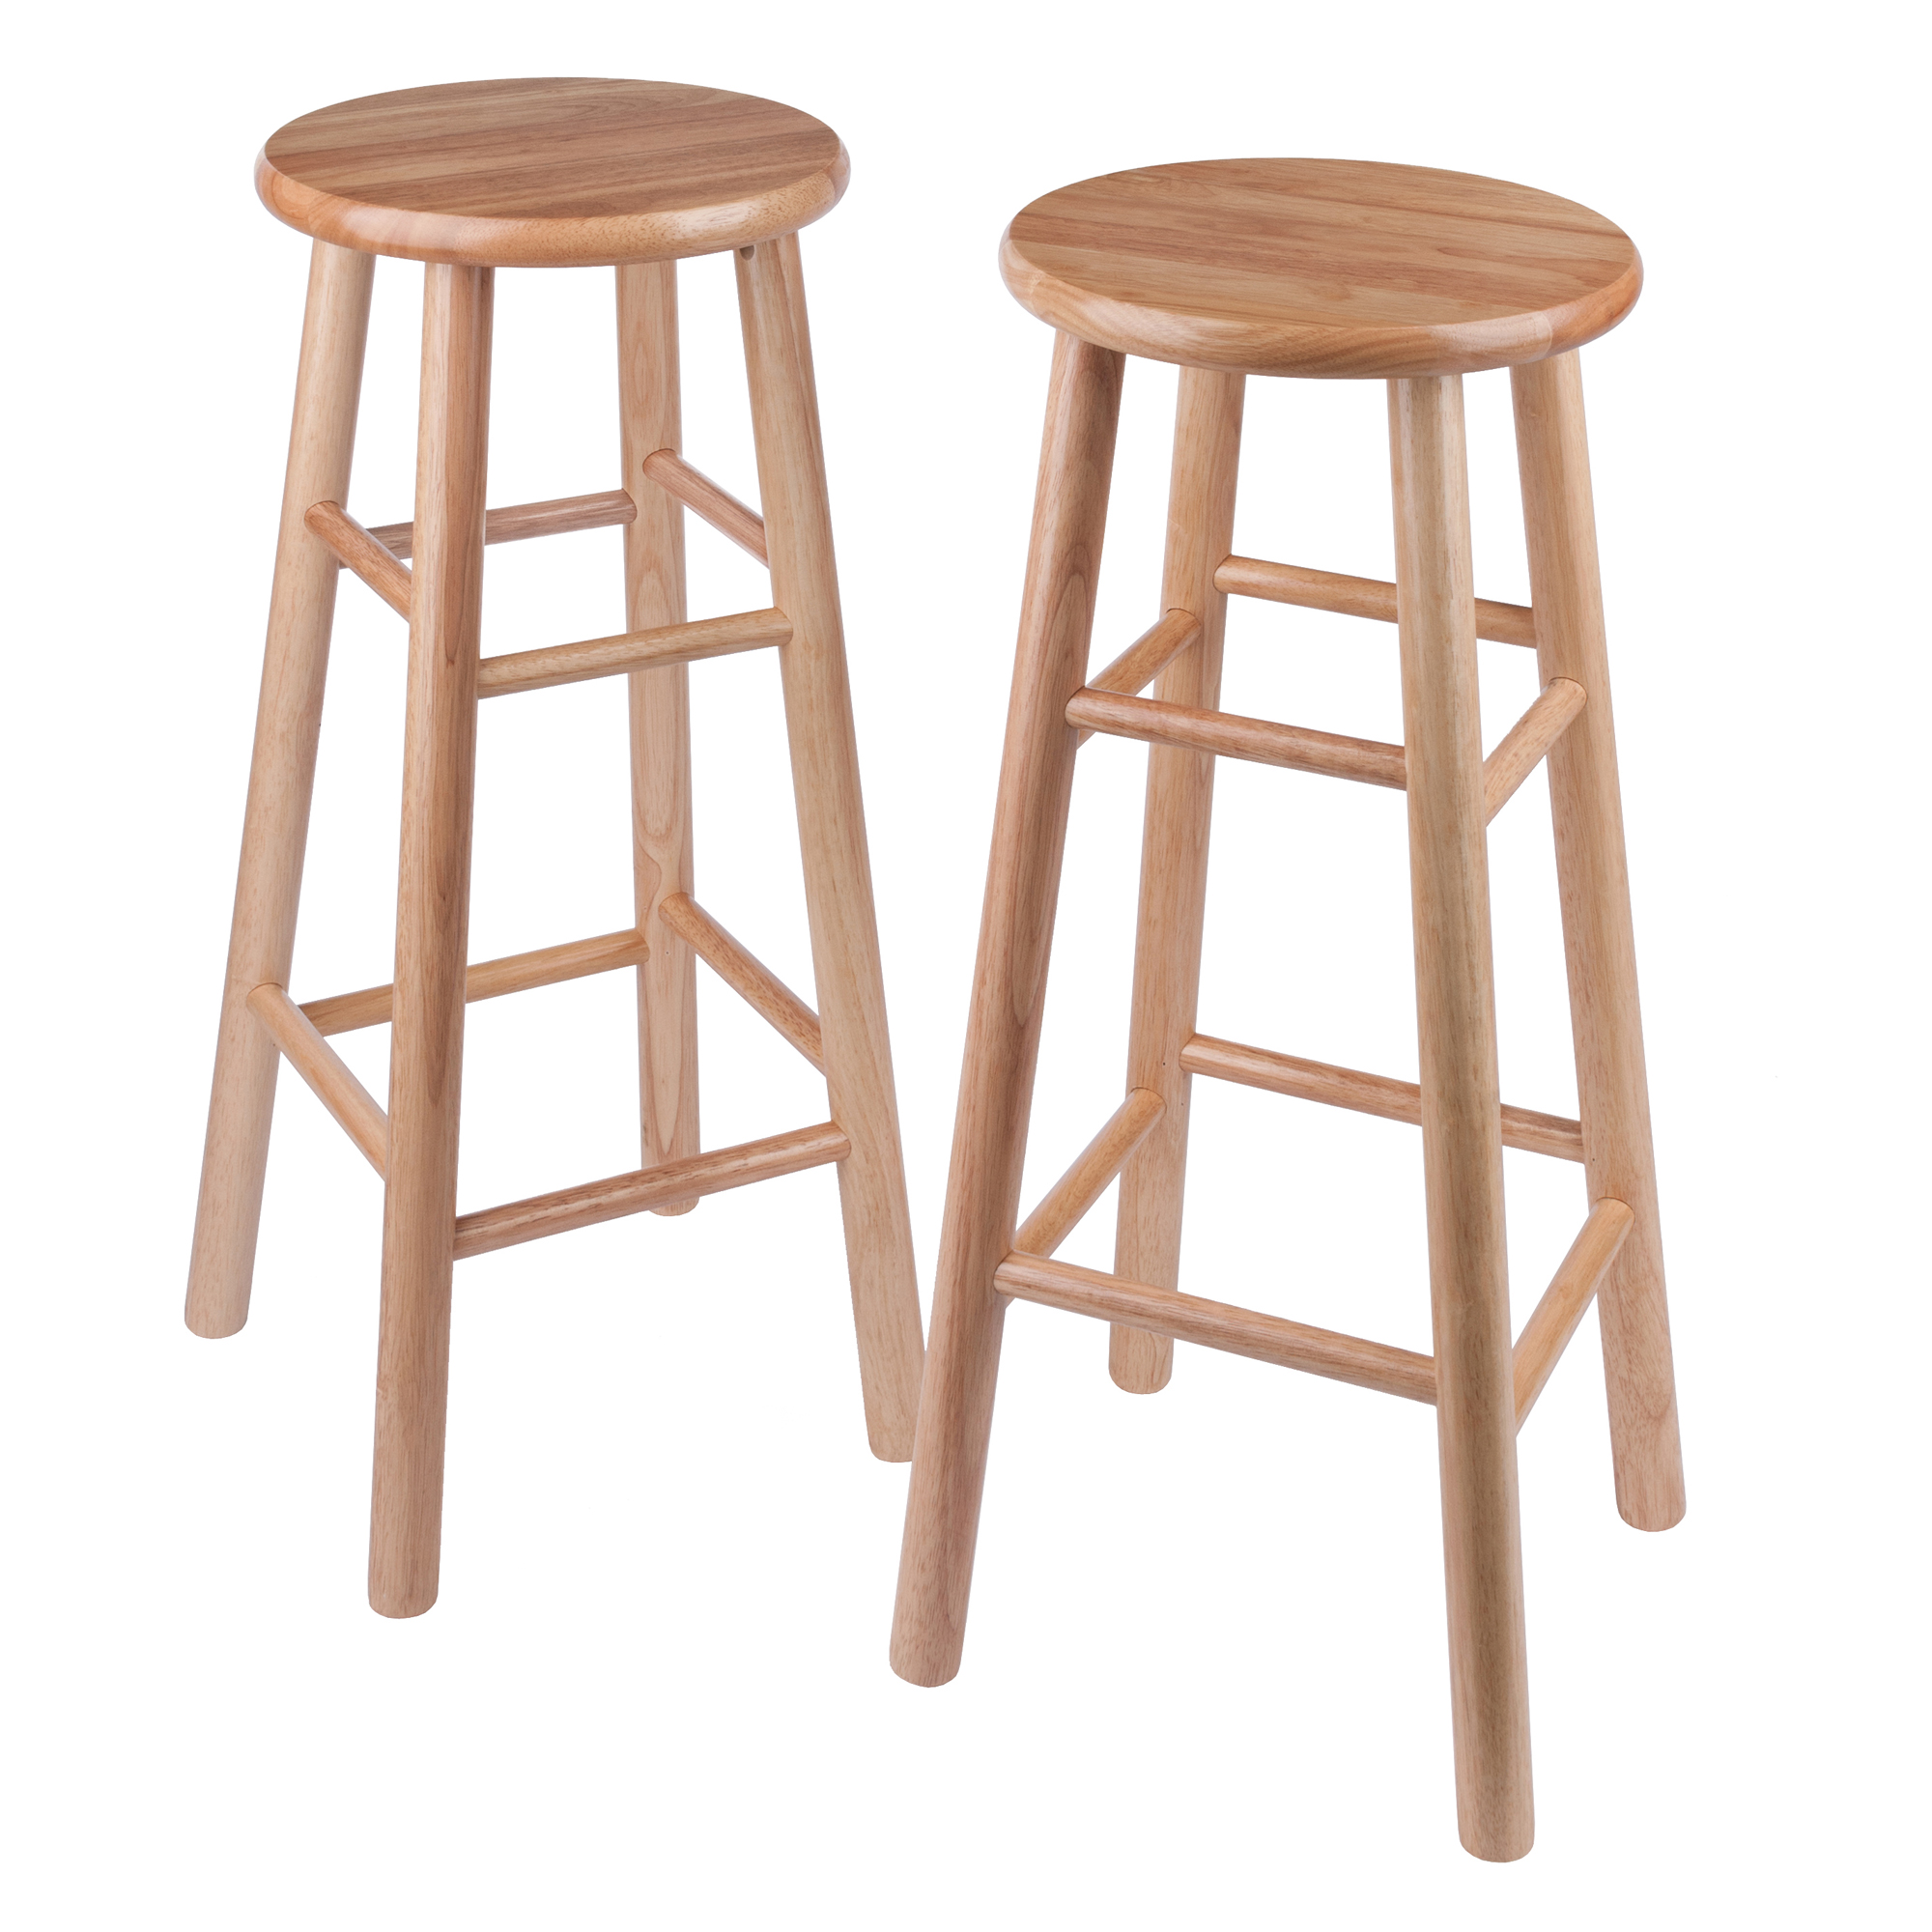 Winsome All Natural 30 in. Beveled Seat Bar Stools - Set of 2 - image 1 of 6